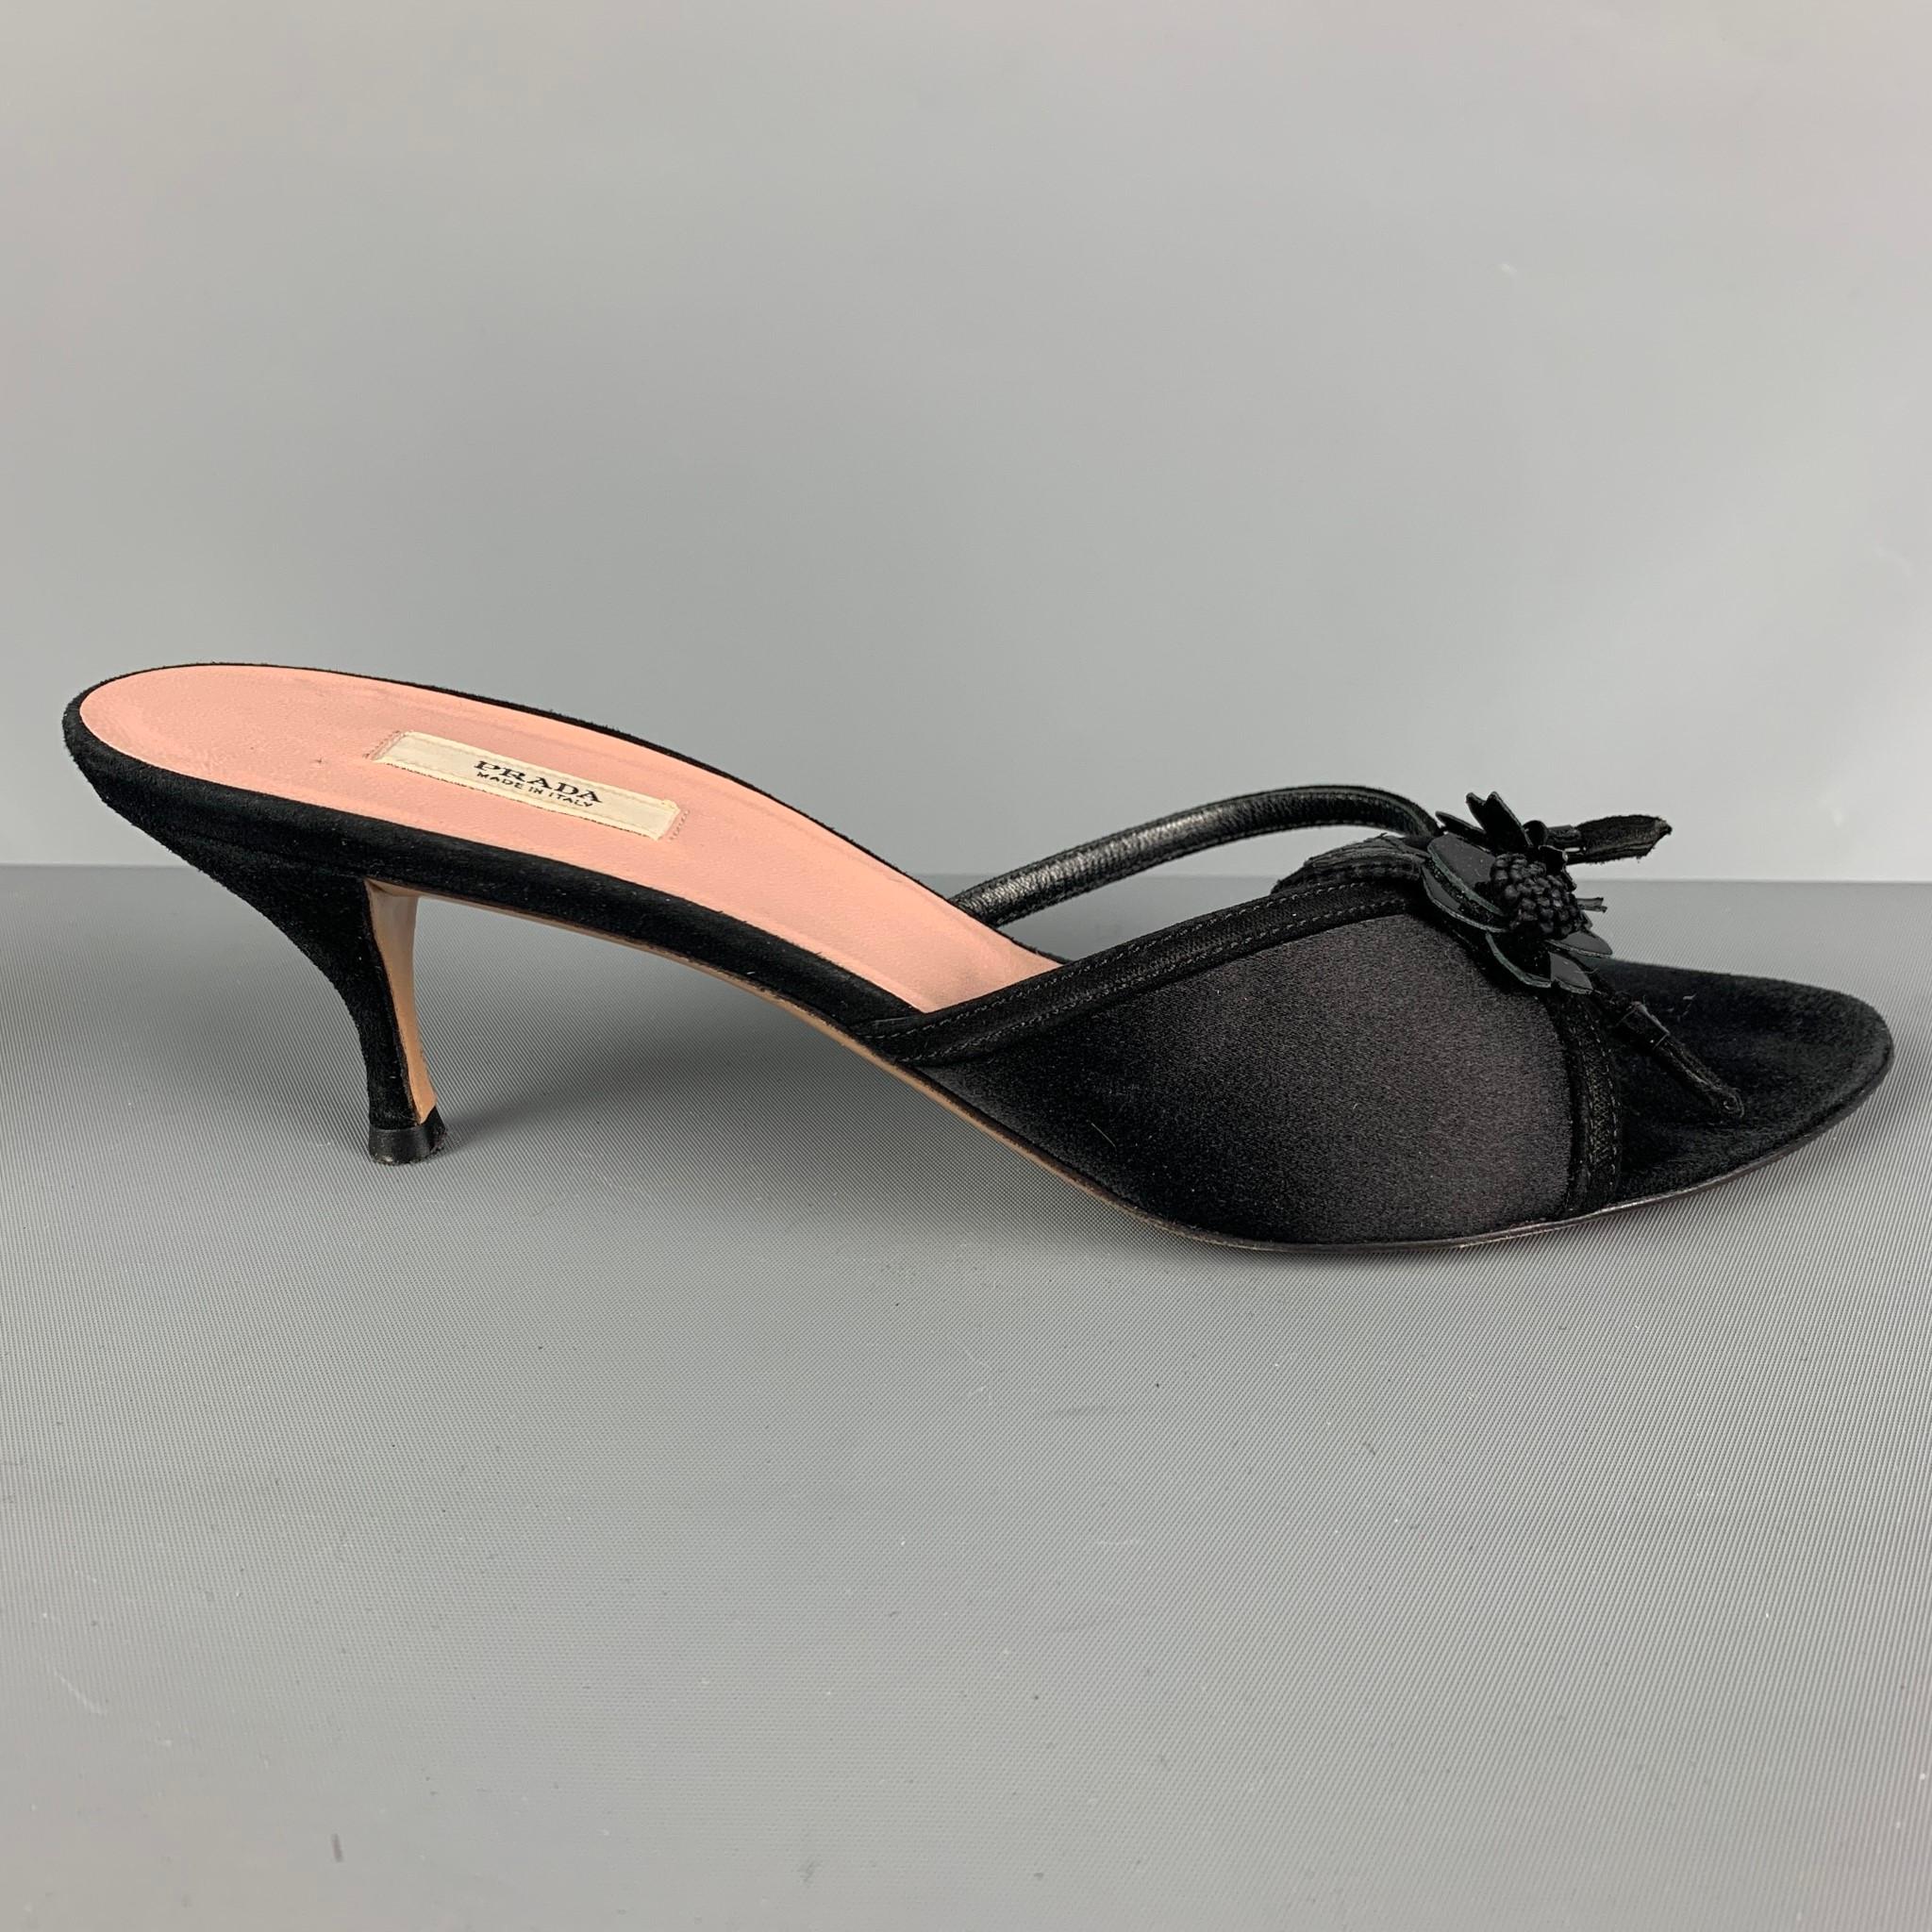 PRADA mule sandals comes in black silk patent leather featuring flower appliques embellishment at straps, and kitten heels. Made in Italy.

Very Good Pre-Owned Condition. Minor Wear.
Marked: US 38

Heel: 2.5 in. 

 

SKU: 117833
Category: